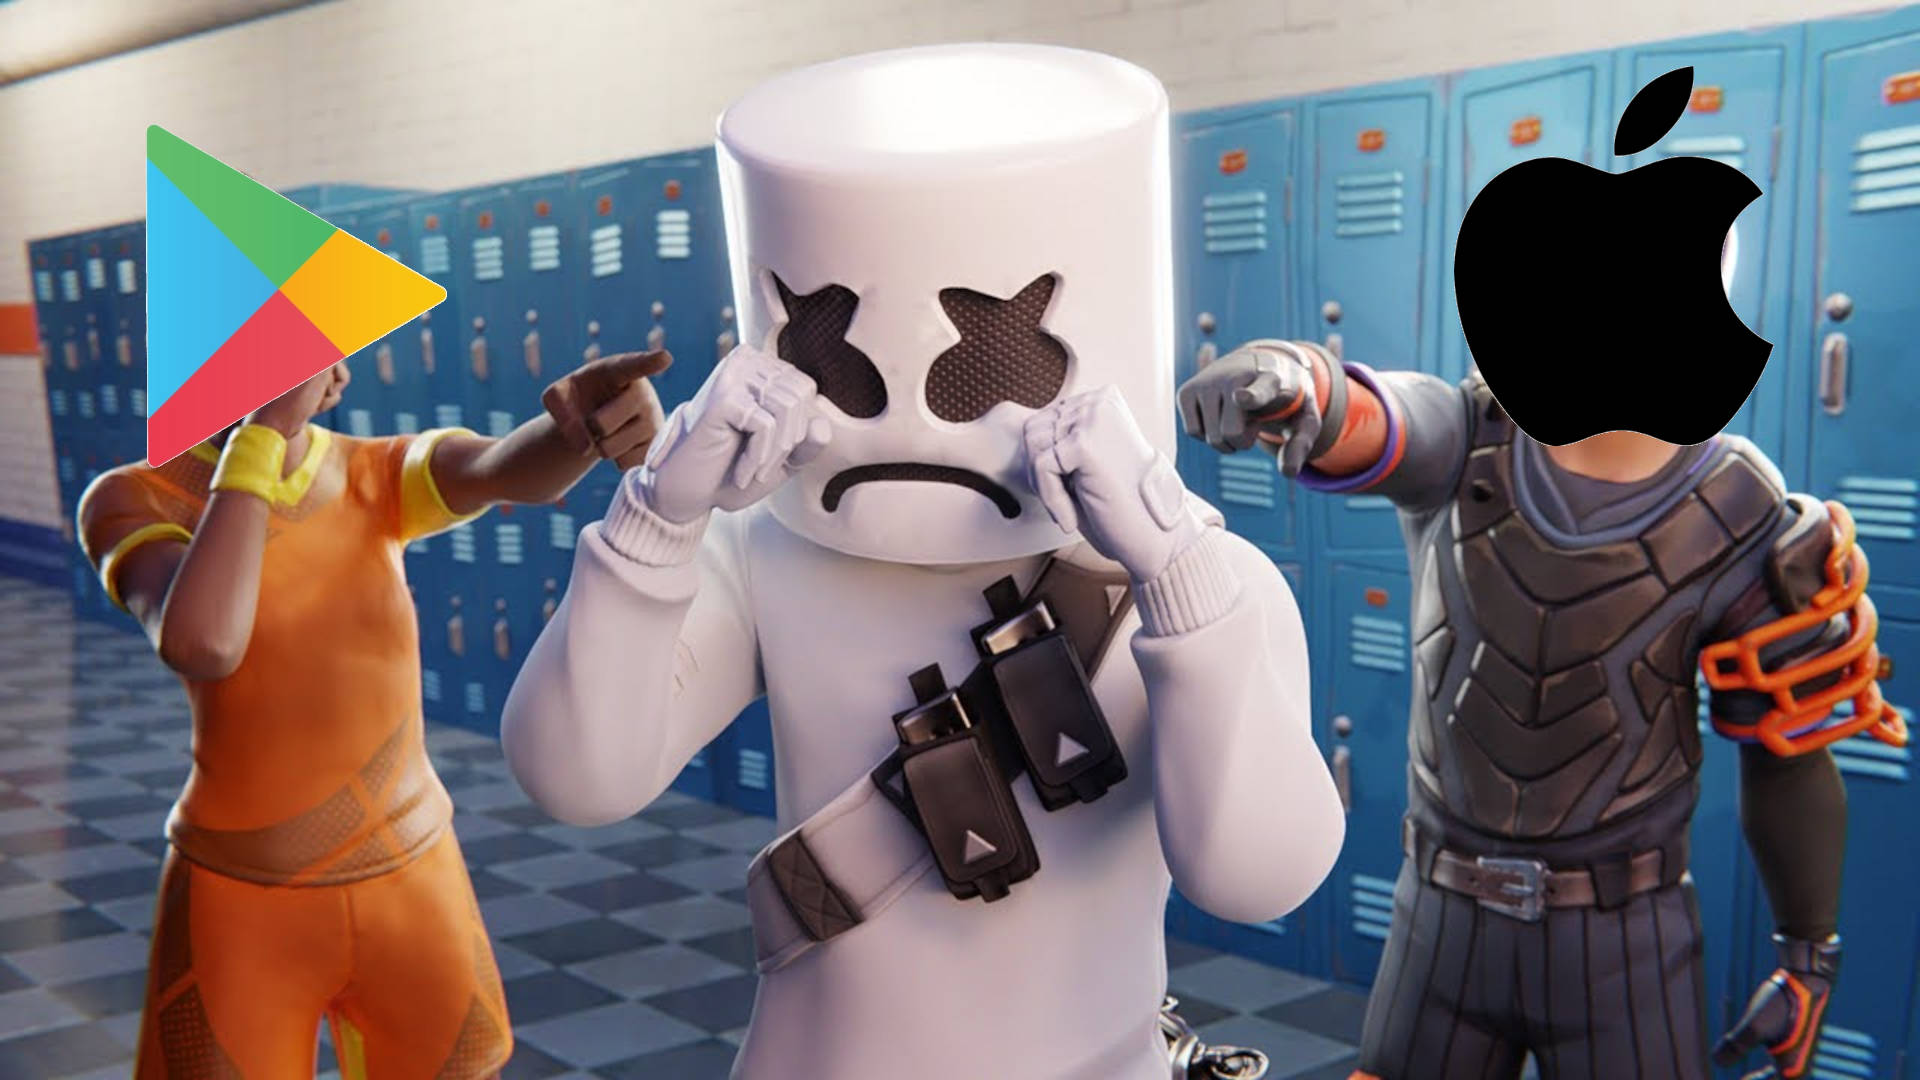 Epic Games wins against Apple on Unreal Engine, loses Fortnite: Know  details